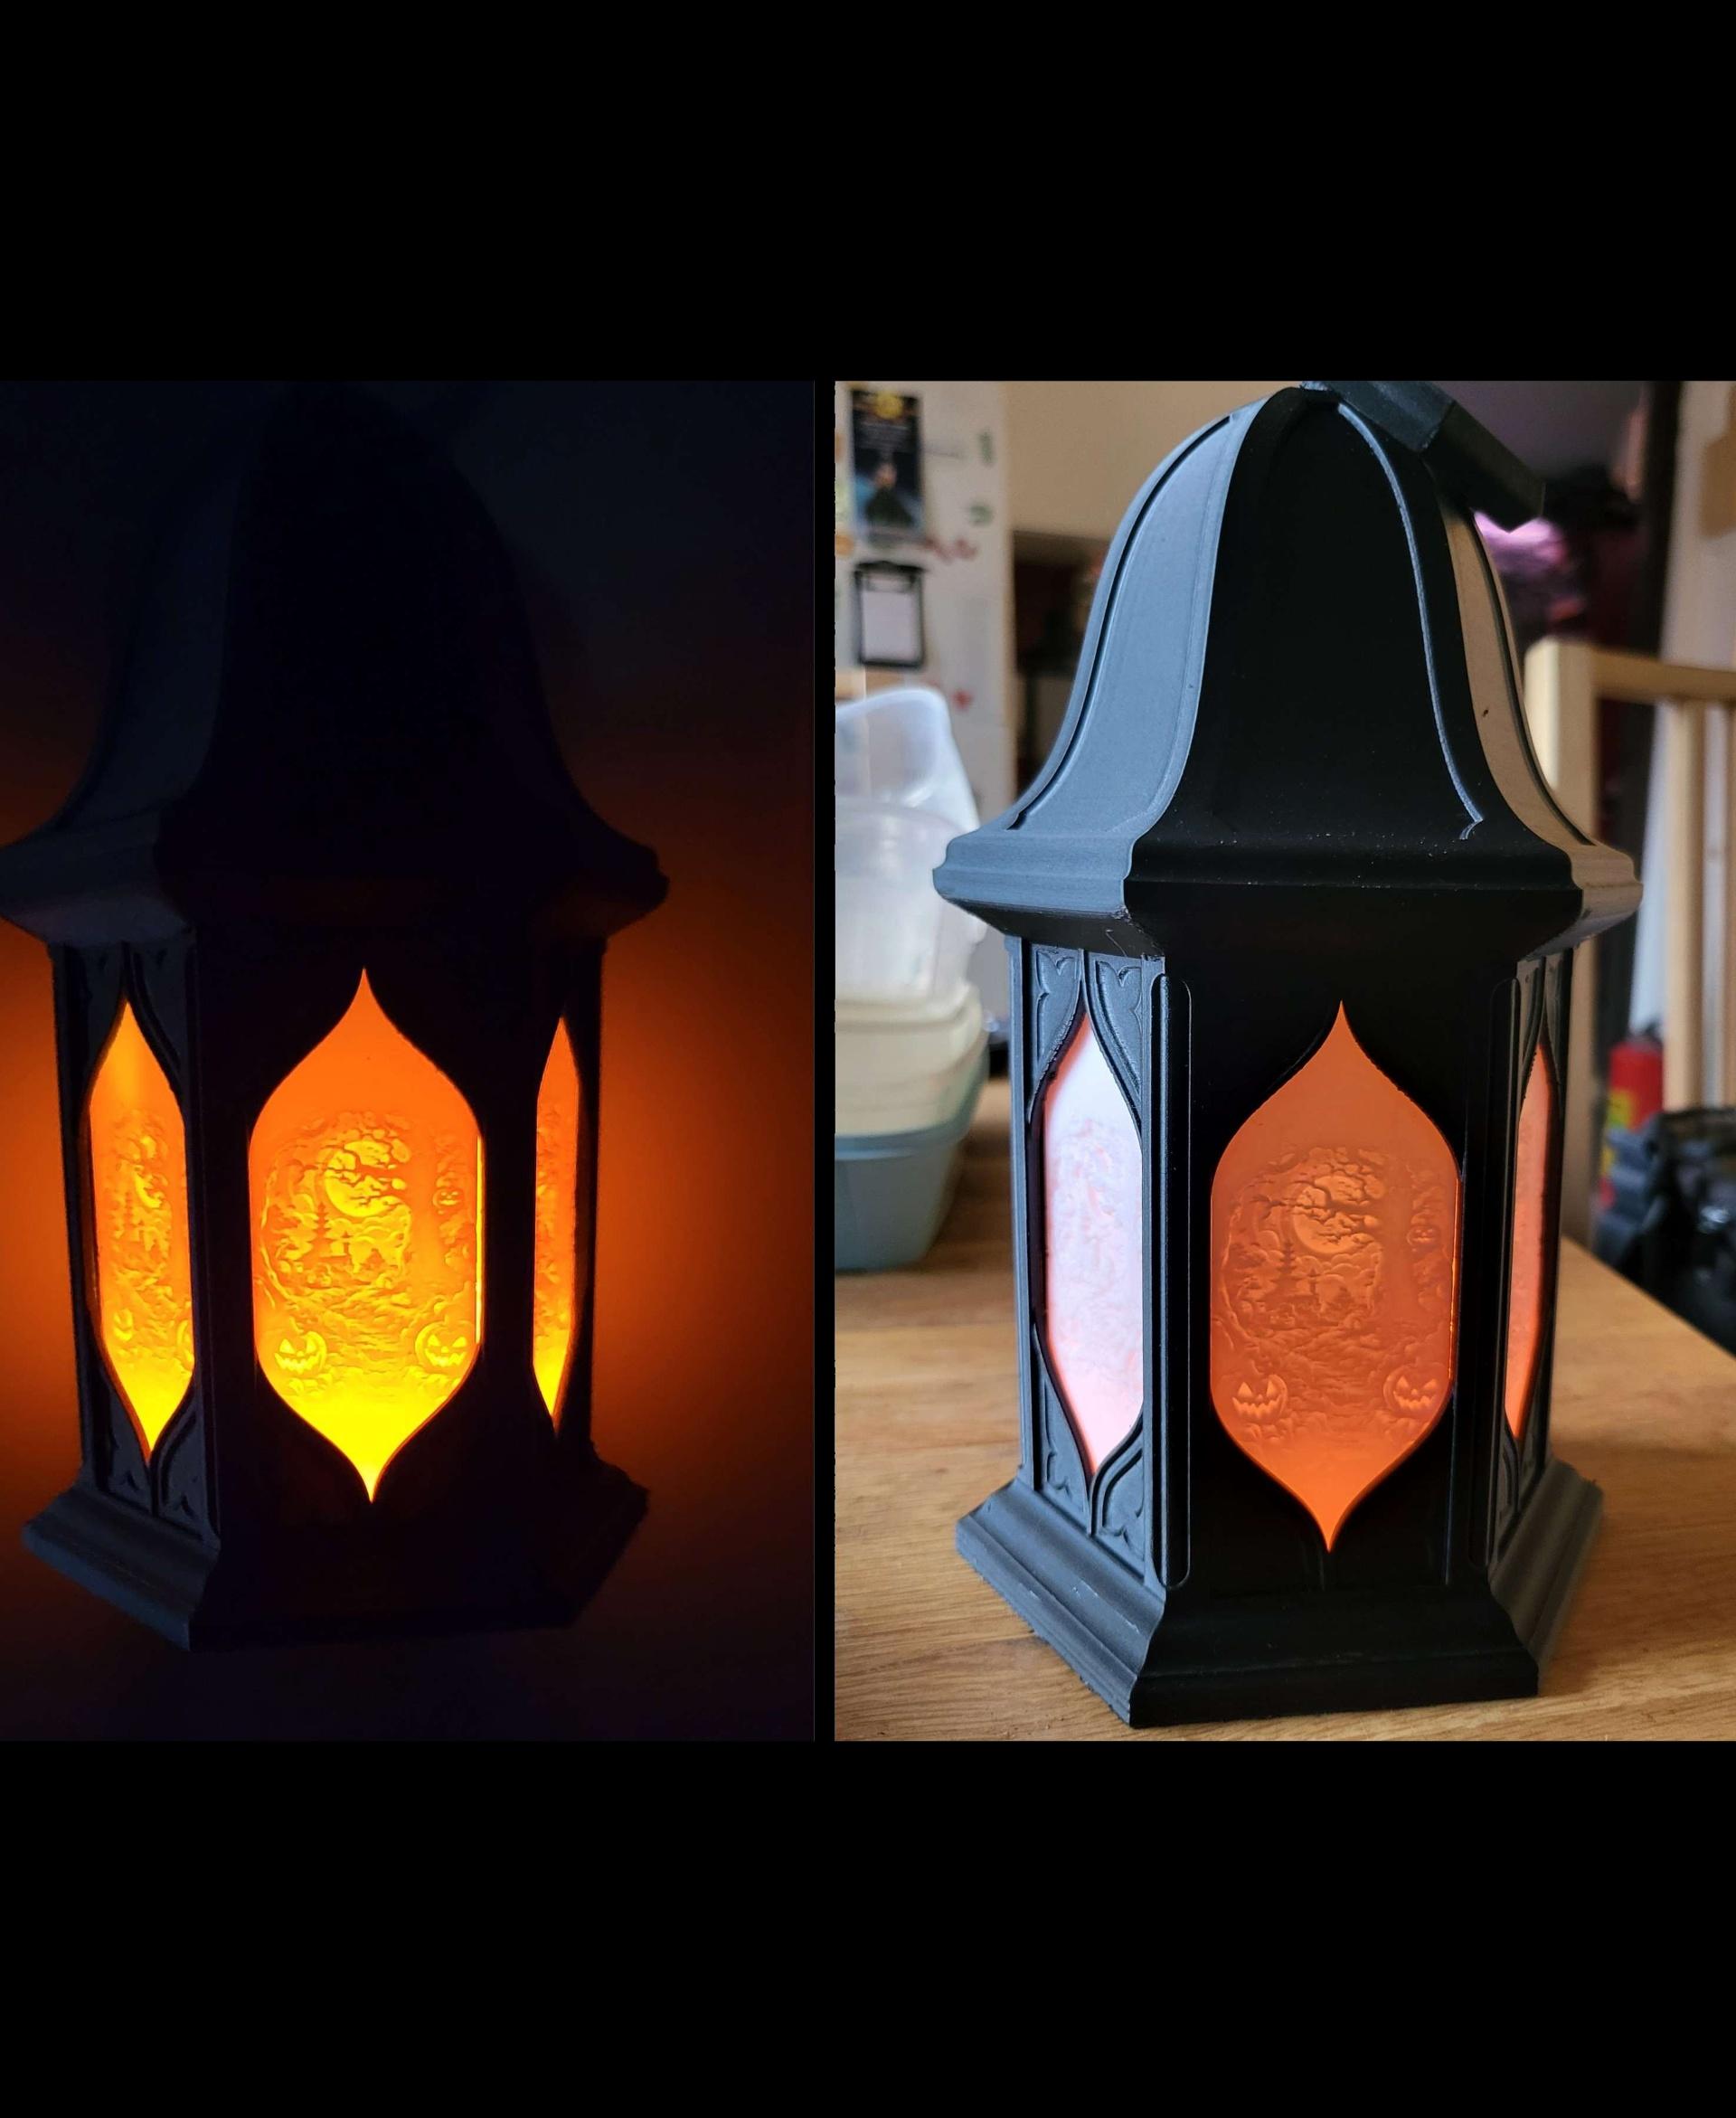 Gothic Lantern - Hanging Version - Great lantern. Made custom lithophane panels for it for some extra flare. - 3d model